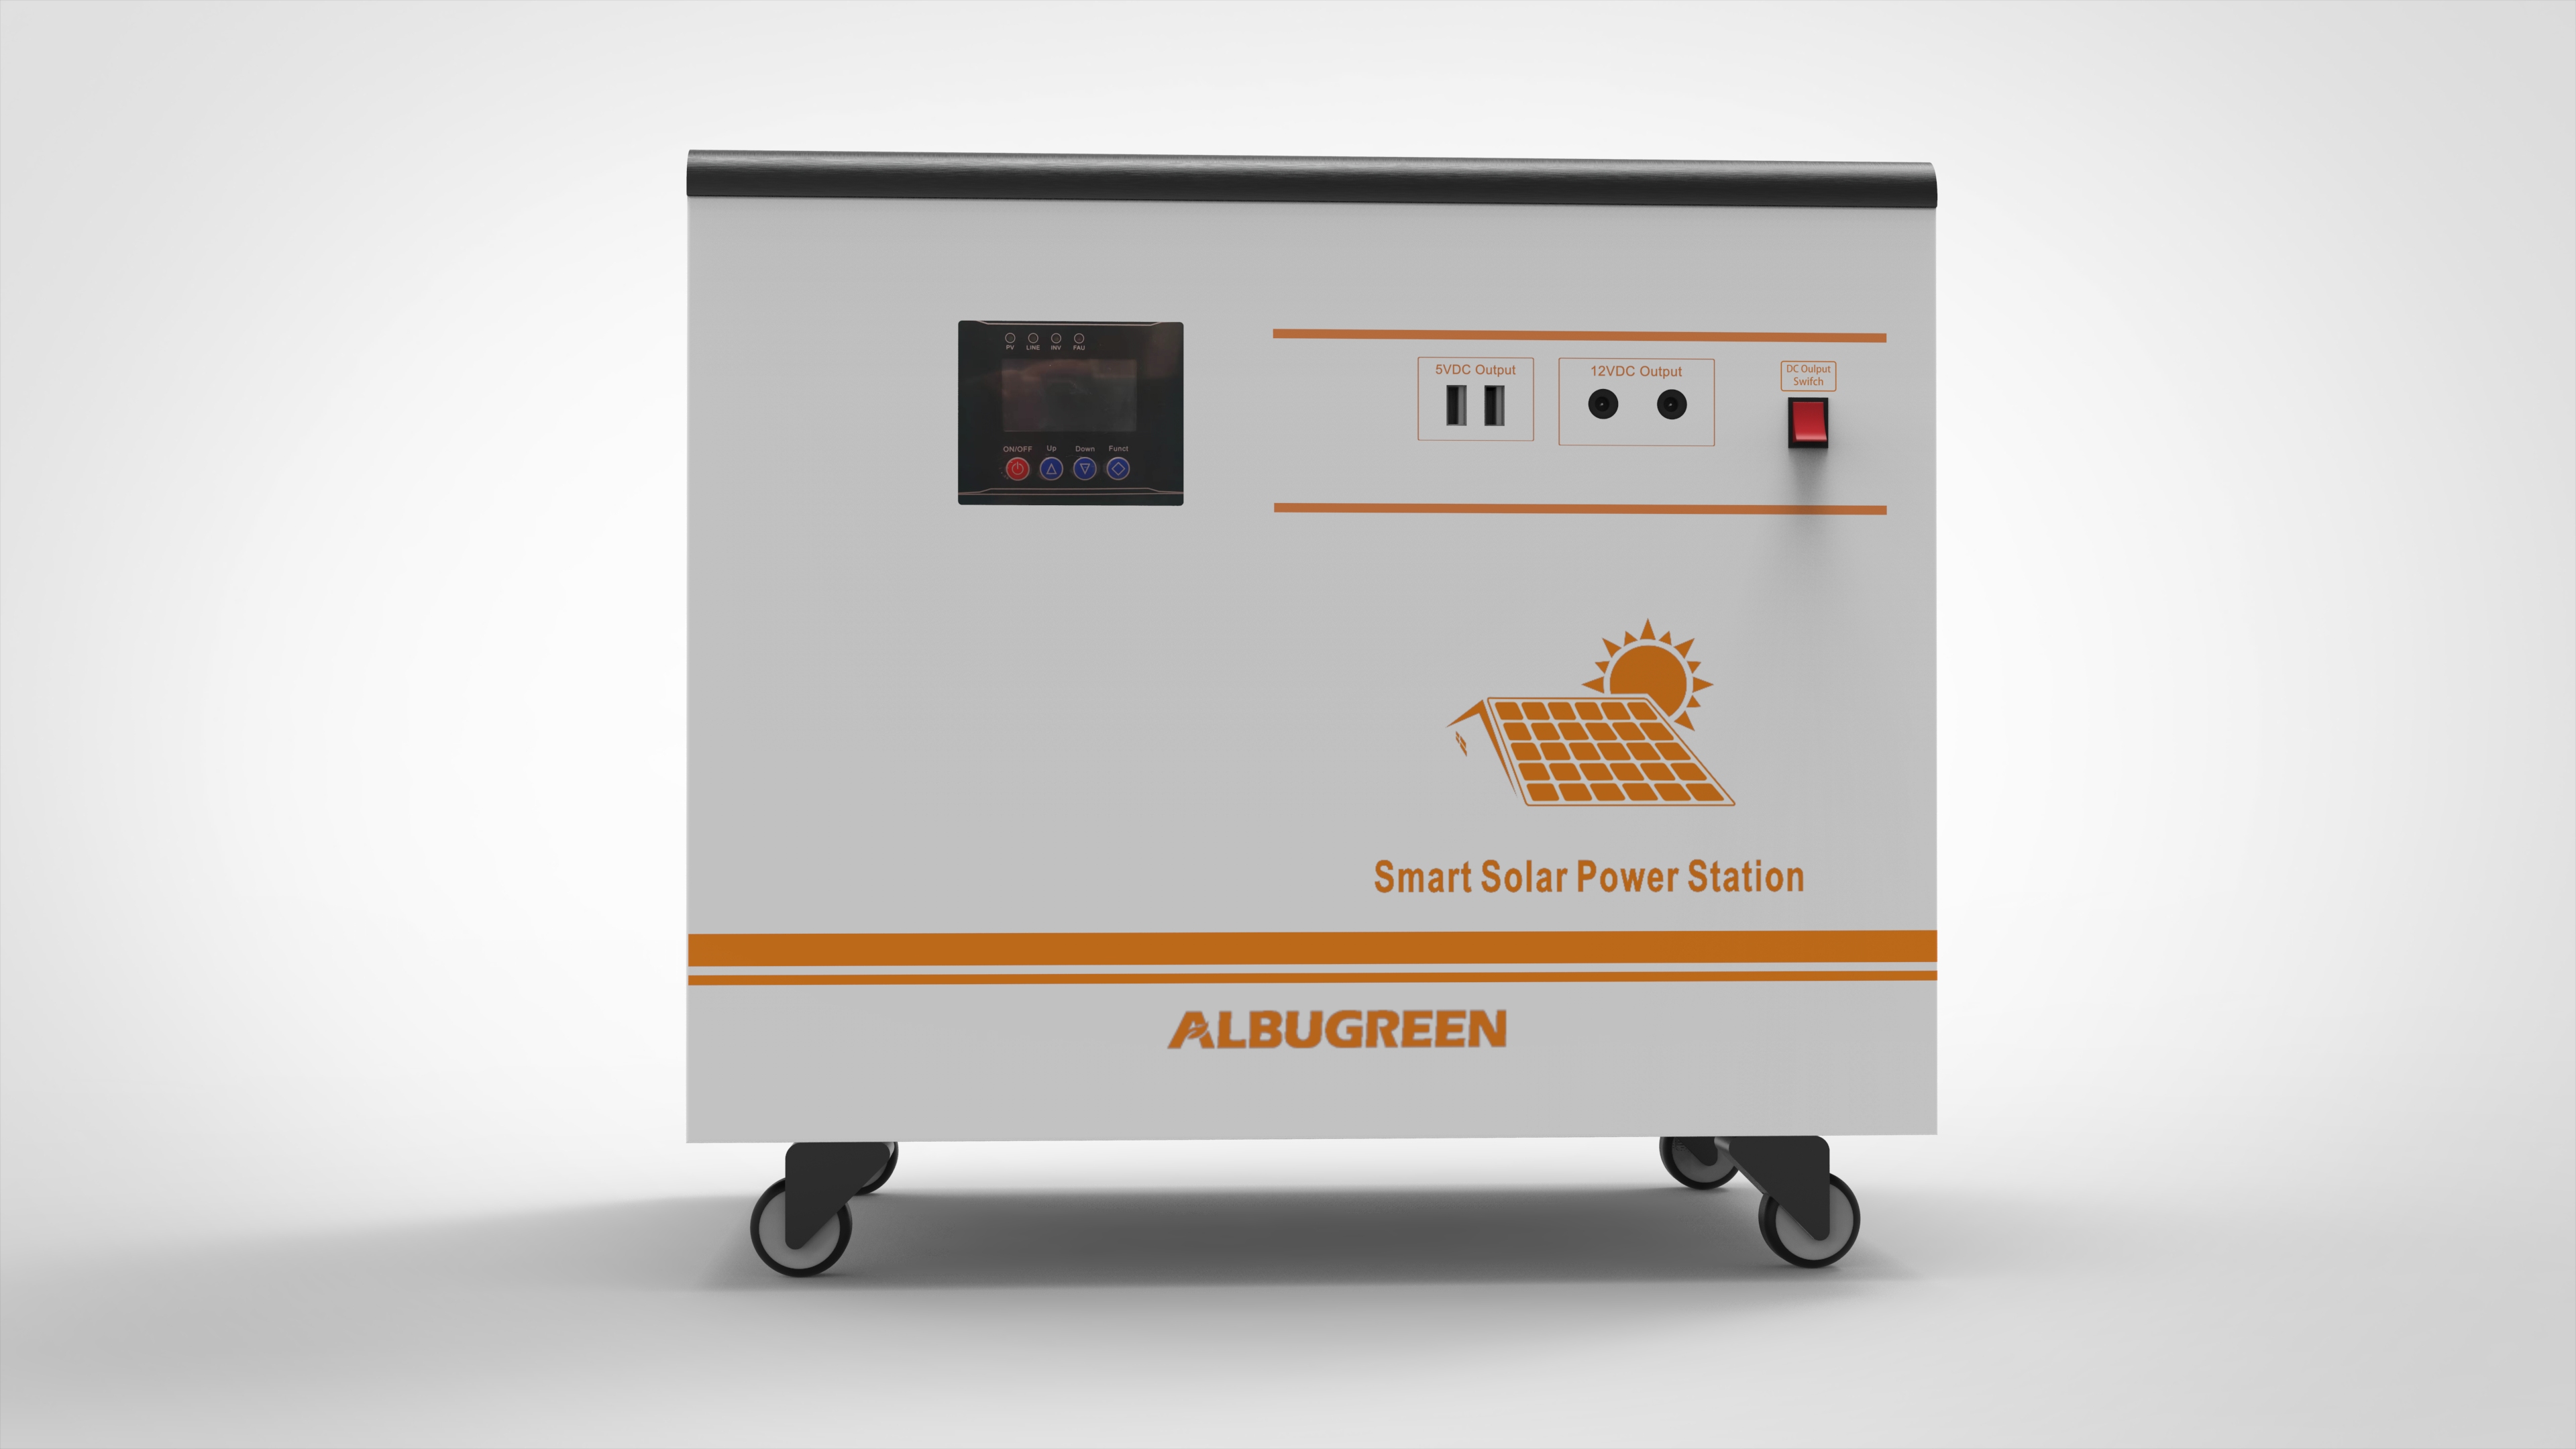 3000w 220v with Battery Ports in One Solar Power System for Campers